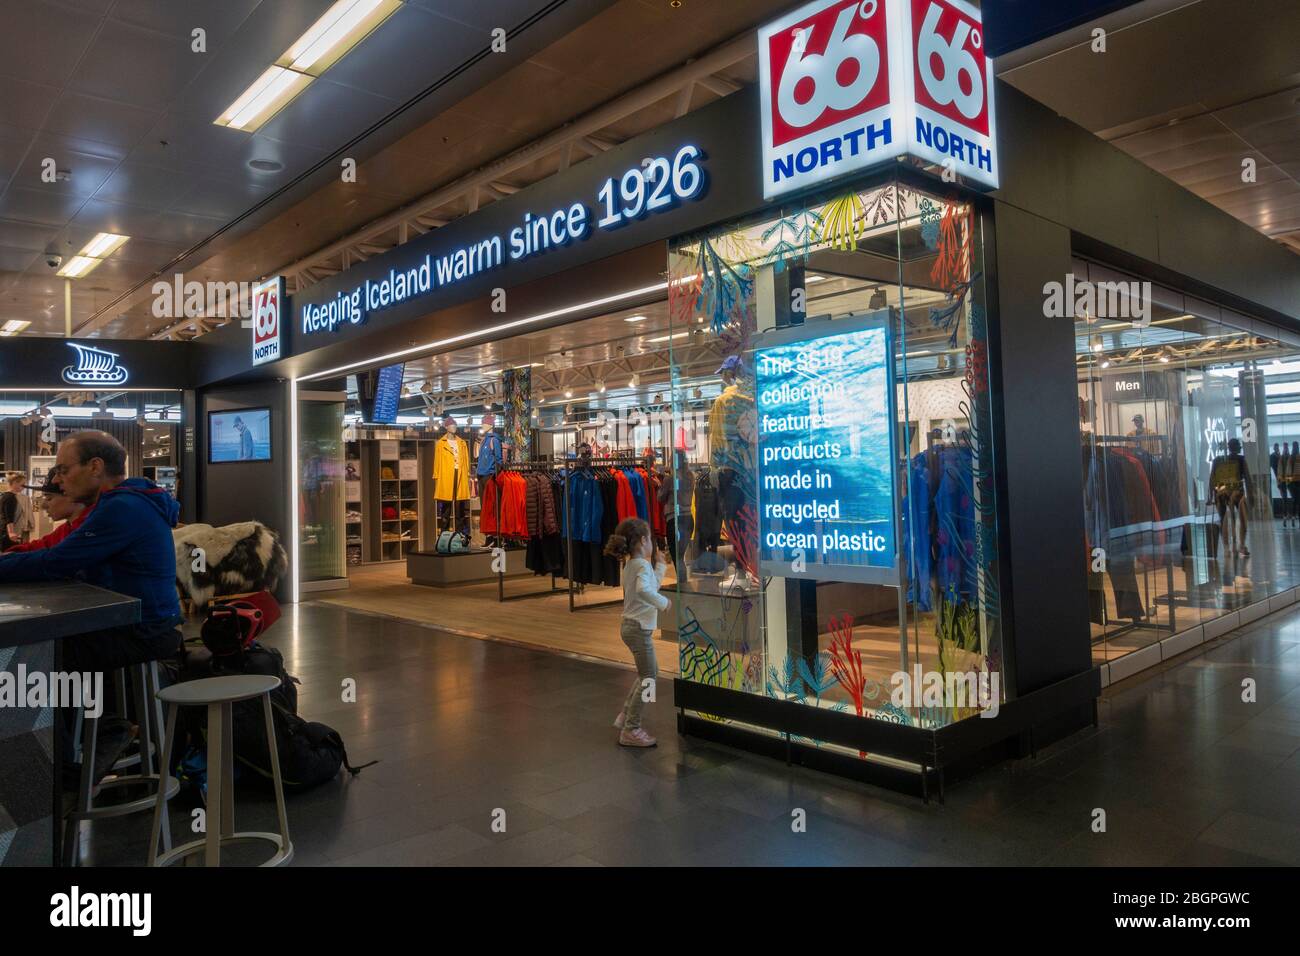 A 66° North clothing outlet in Keflavík International Airport, Reykjavik,  Iceland Stock Photo - Alamy